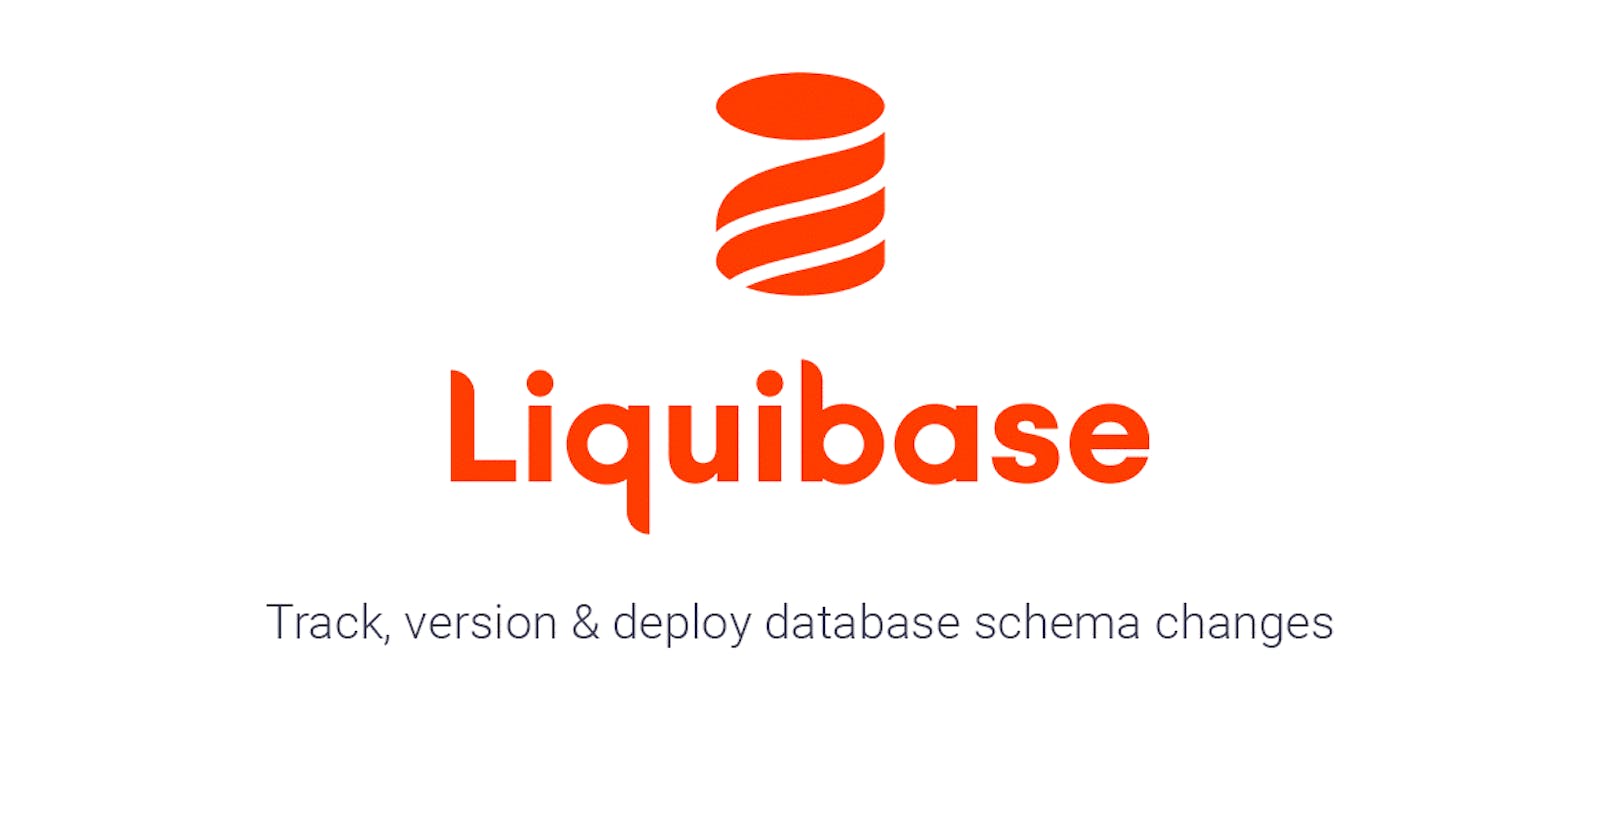 Make your database migration easier with Liquibase